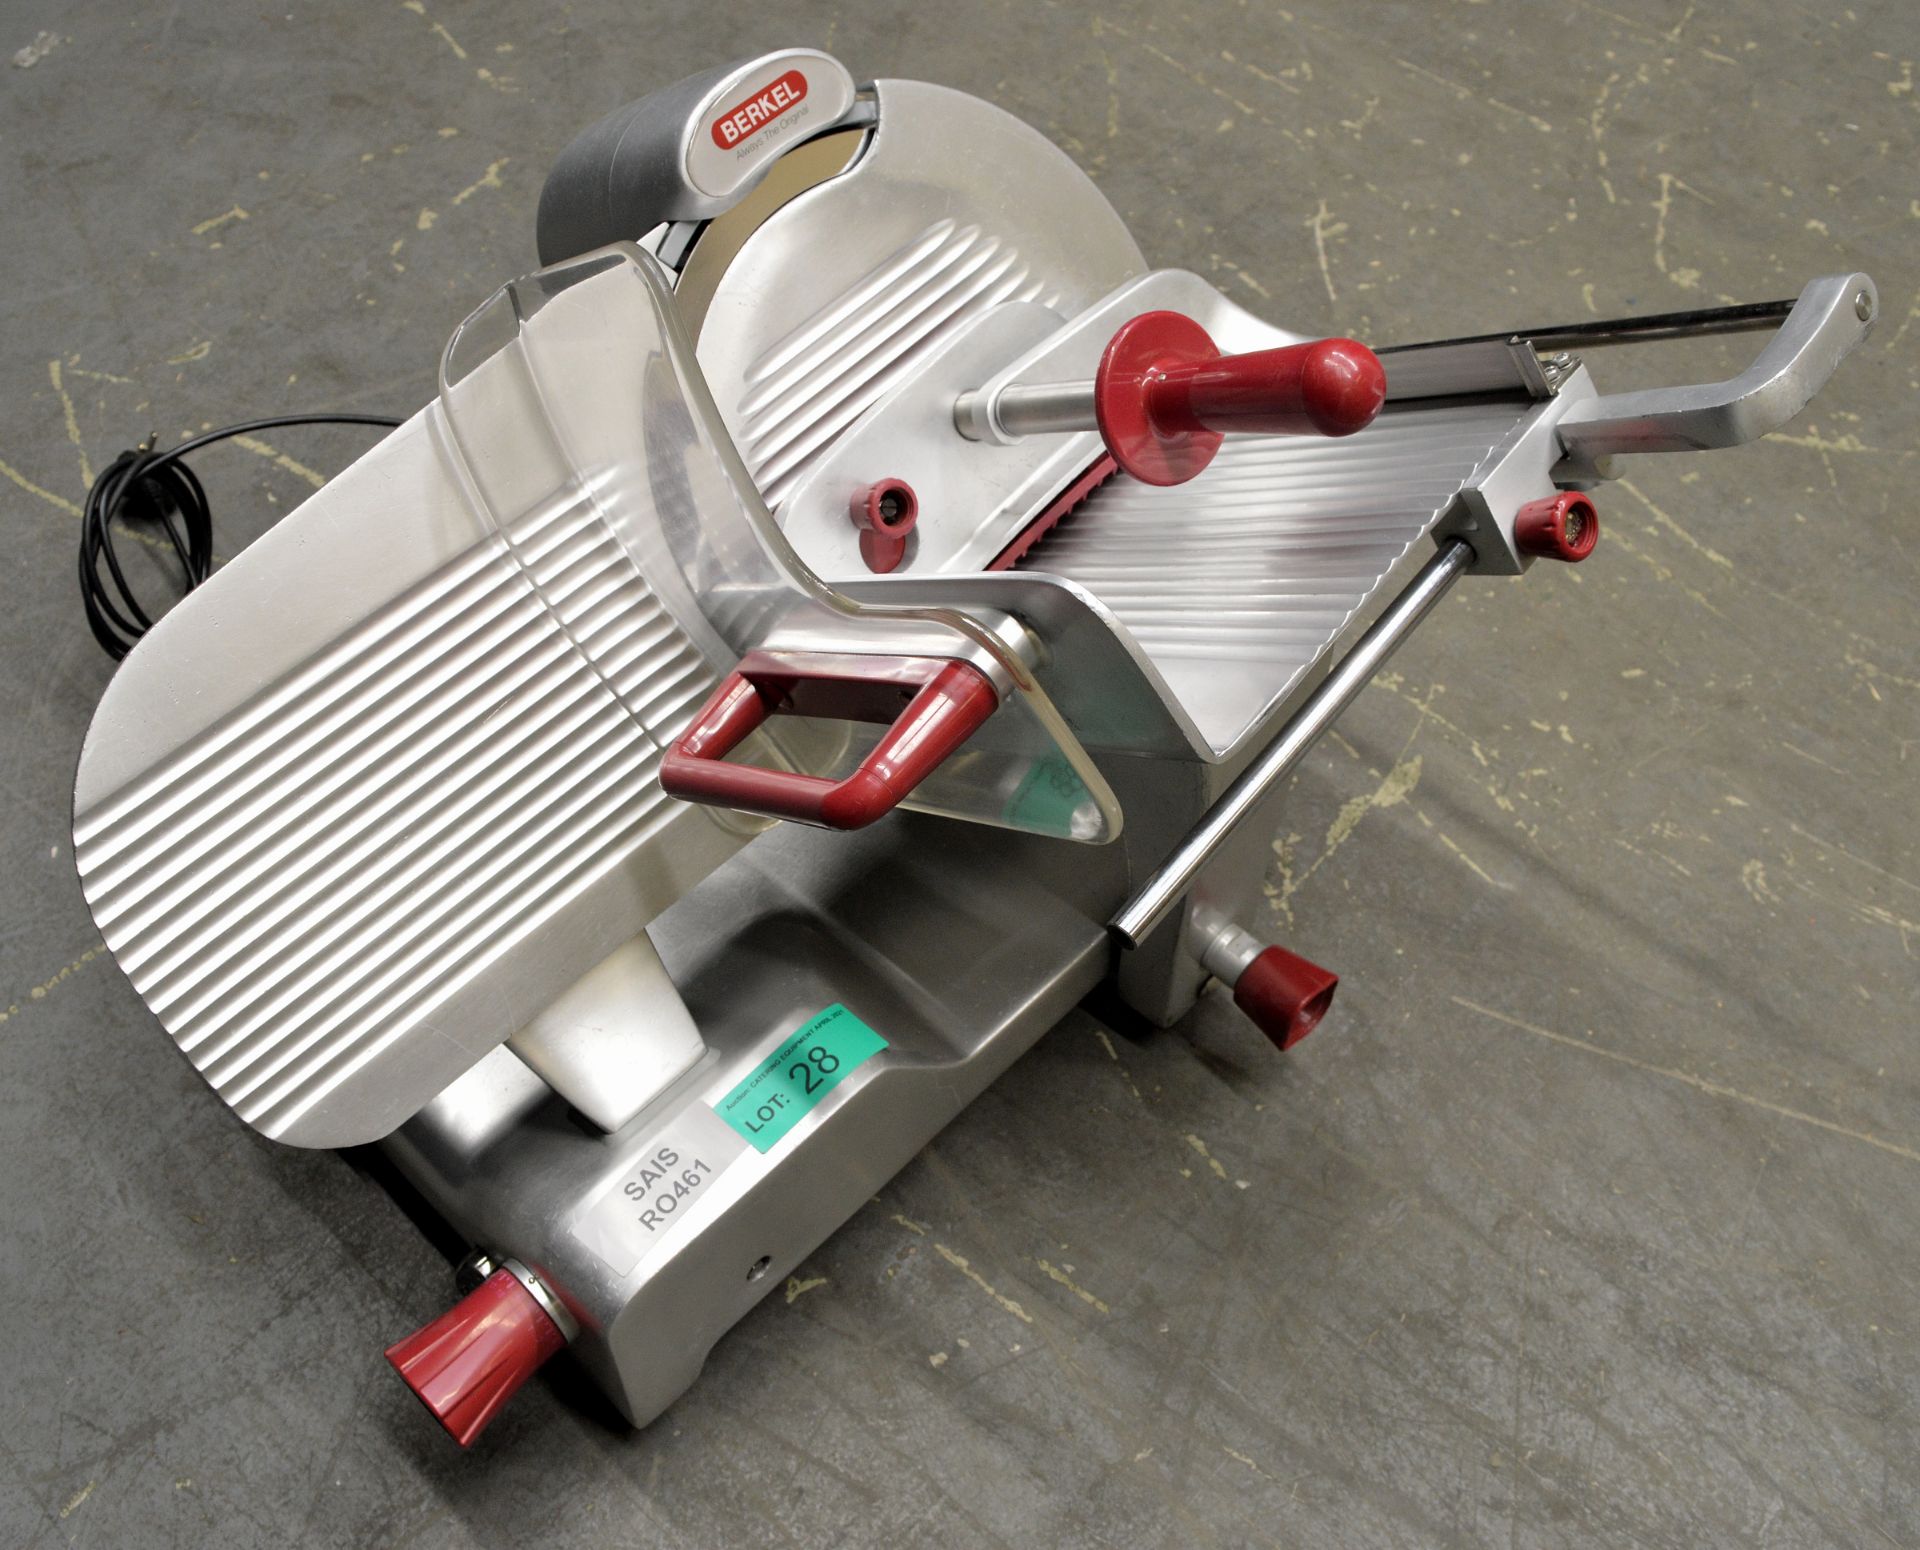 Berkel BSPGL04011A0F 12" Commercial Cooked Meat / Bacon Slicer, single phase electric - Image 6 of 7